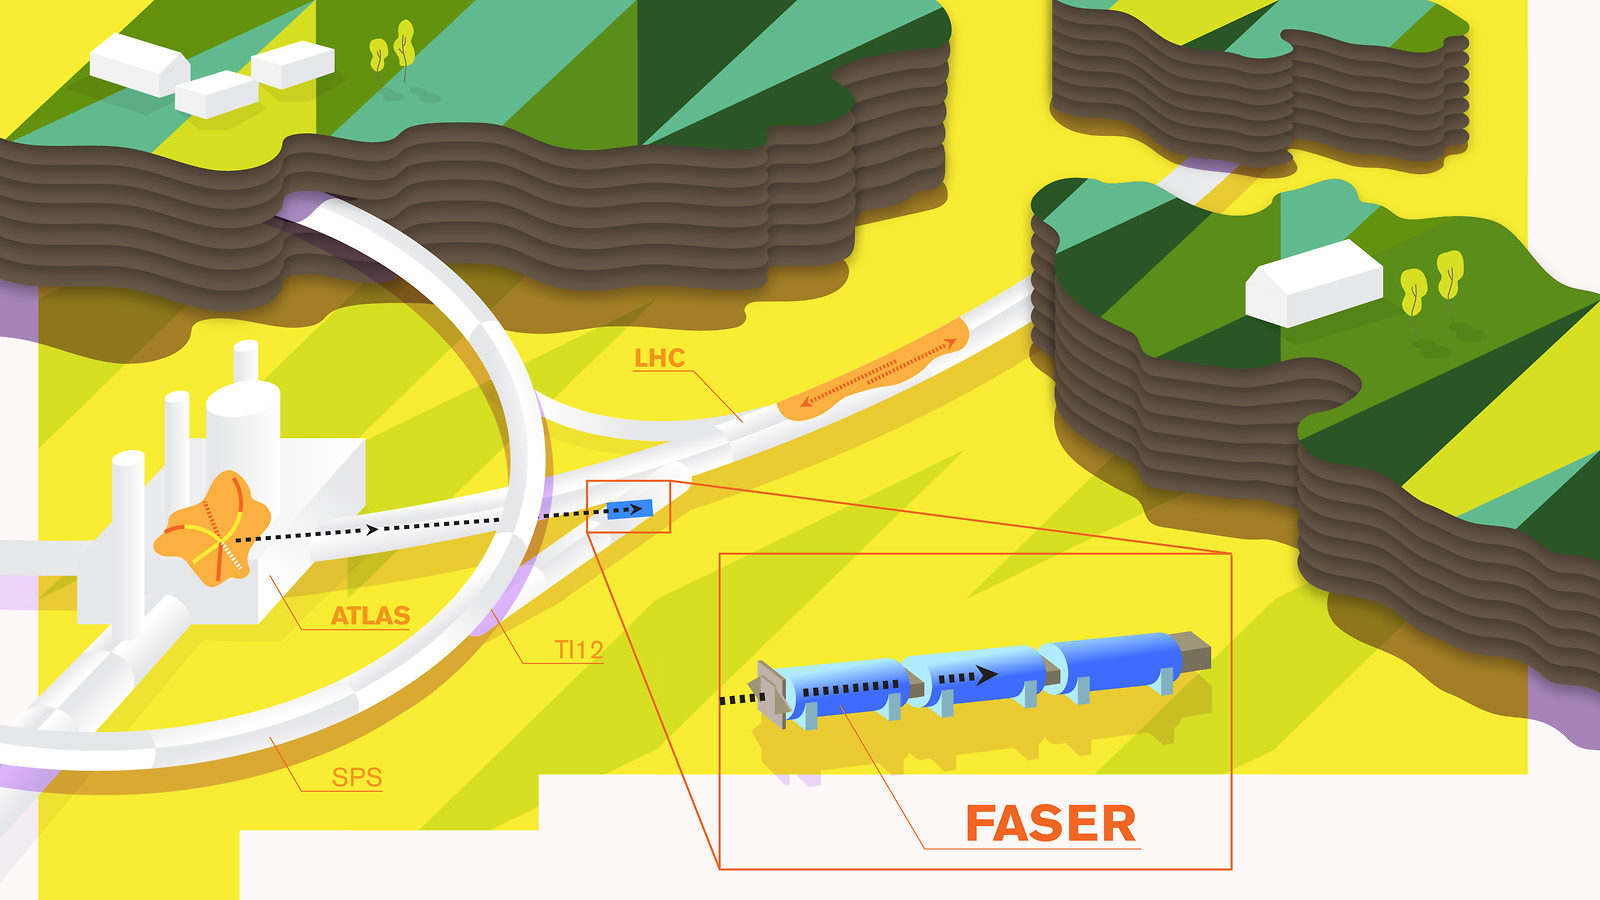 An illustration of the FASER experiment